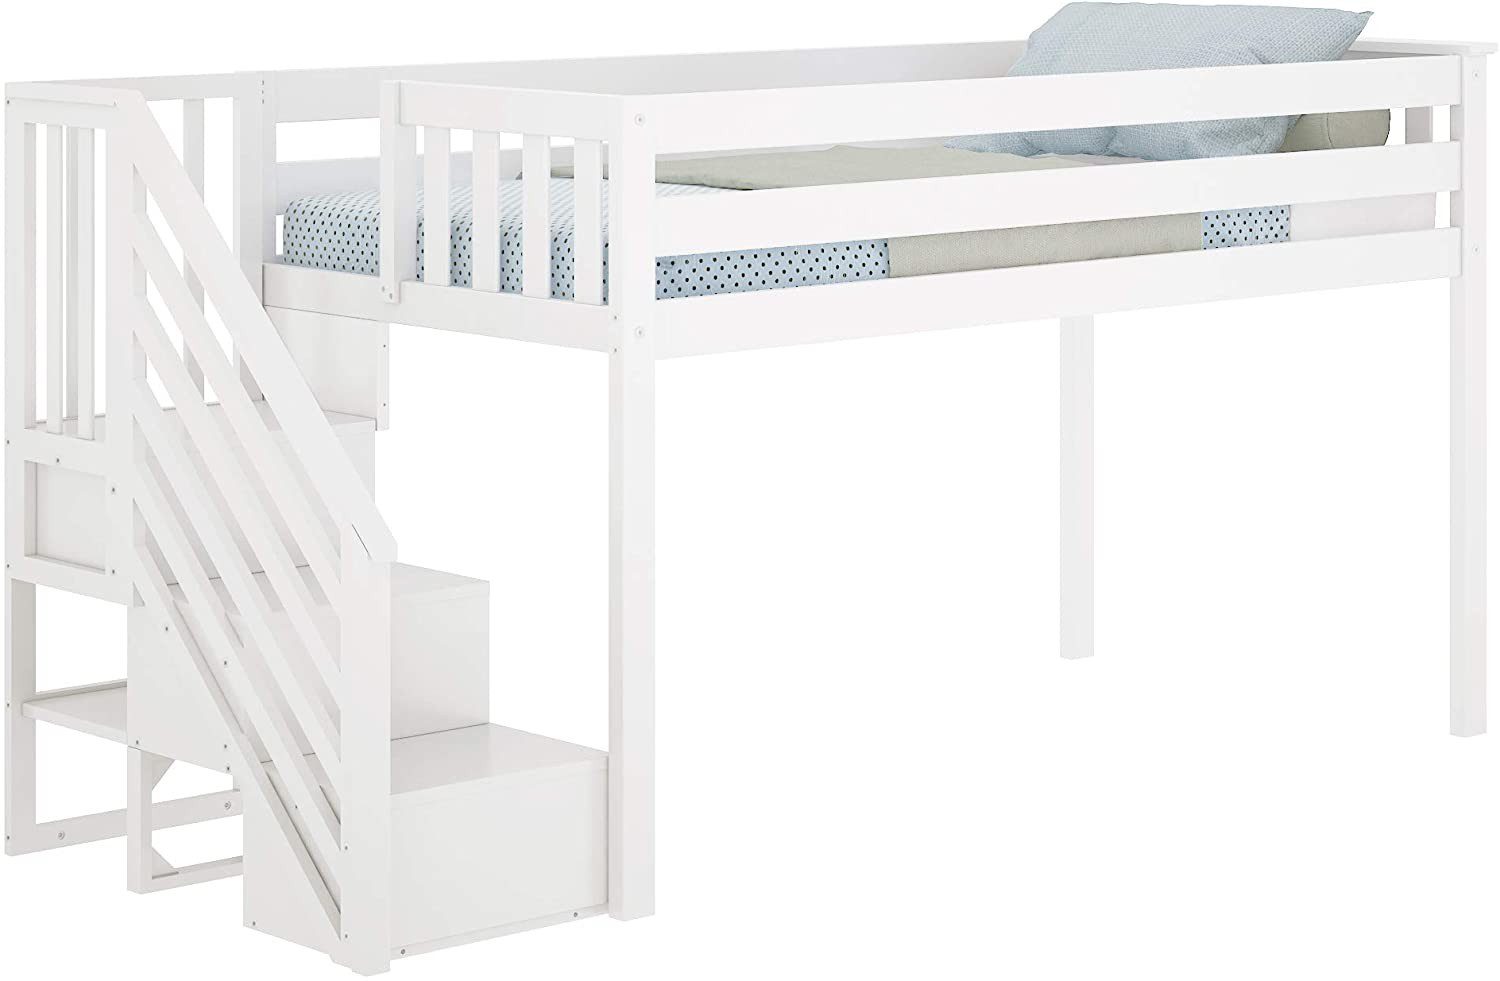 MAX & LILY SOLID WOOD LOW LOFT BED WITH STAIRCASE IN WHITE FINISH